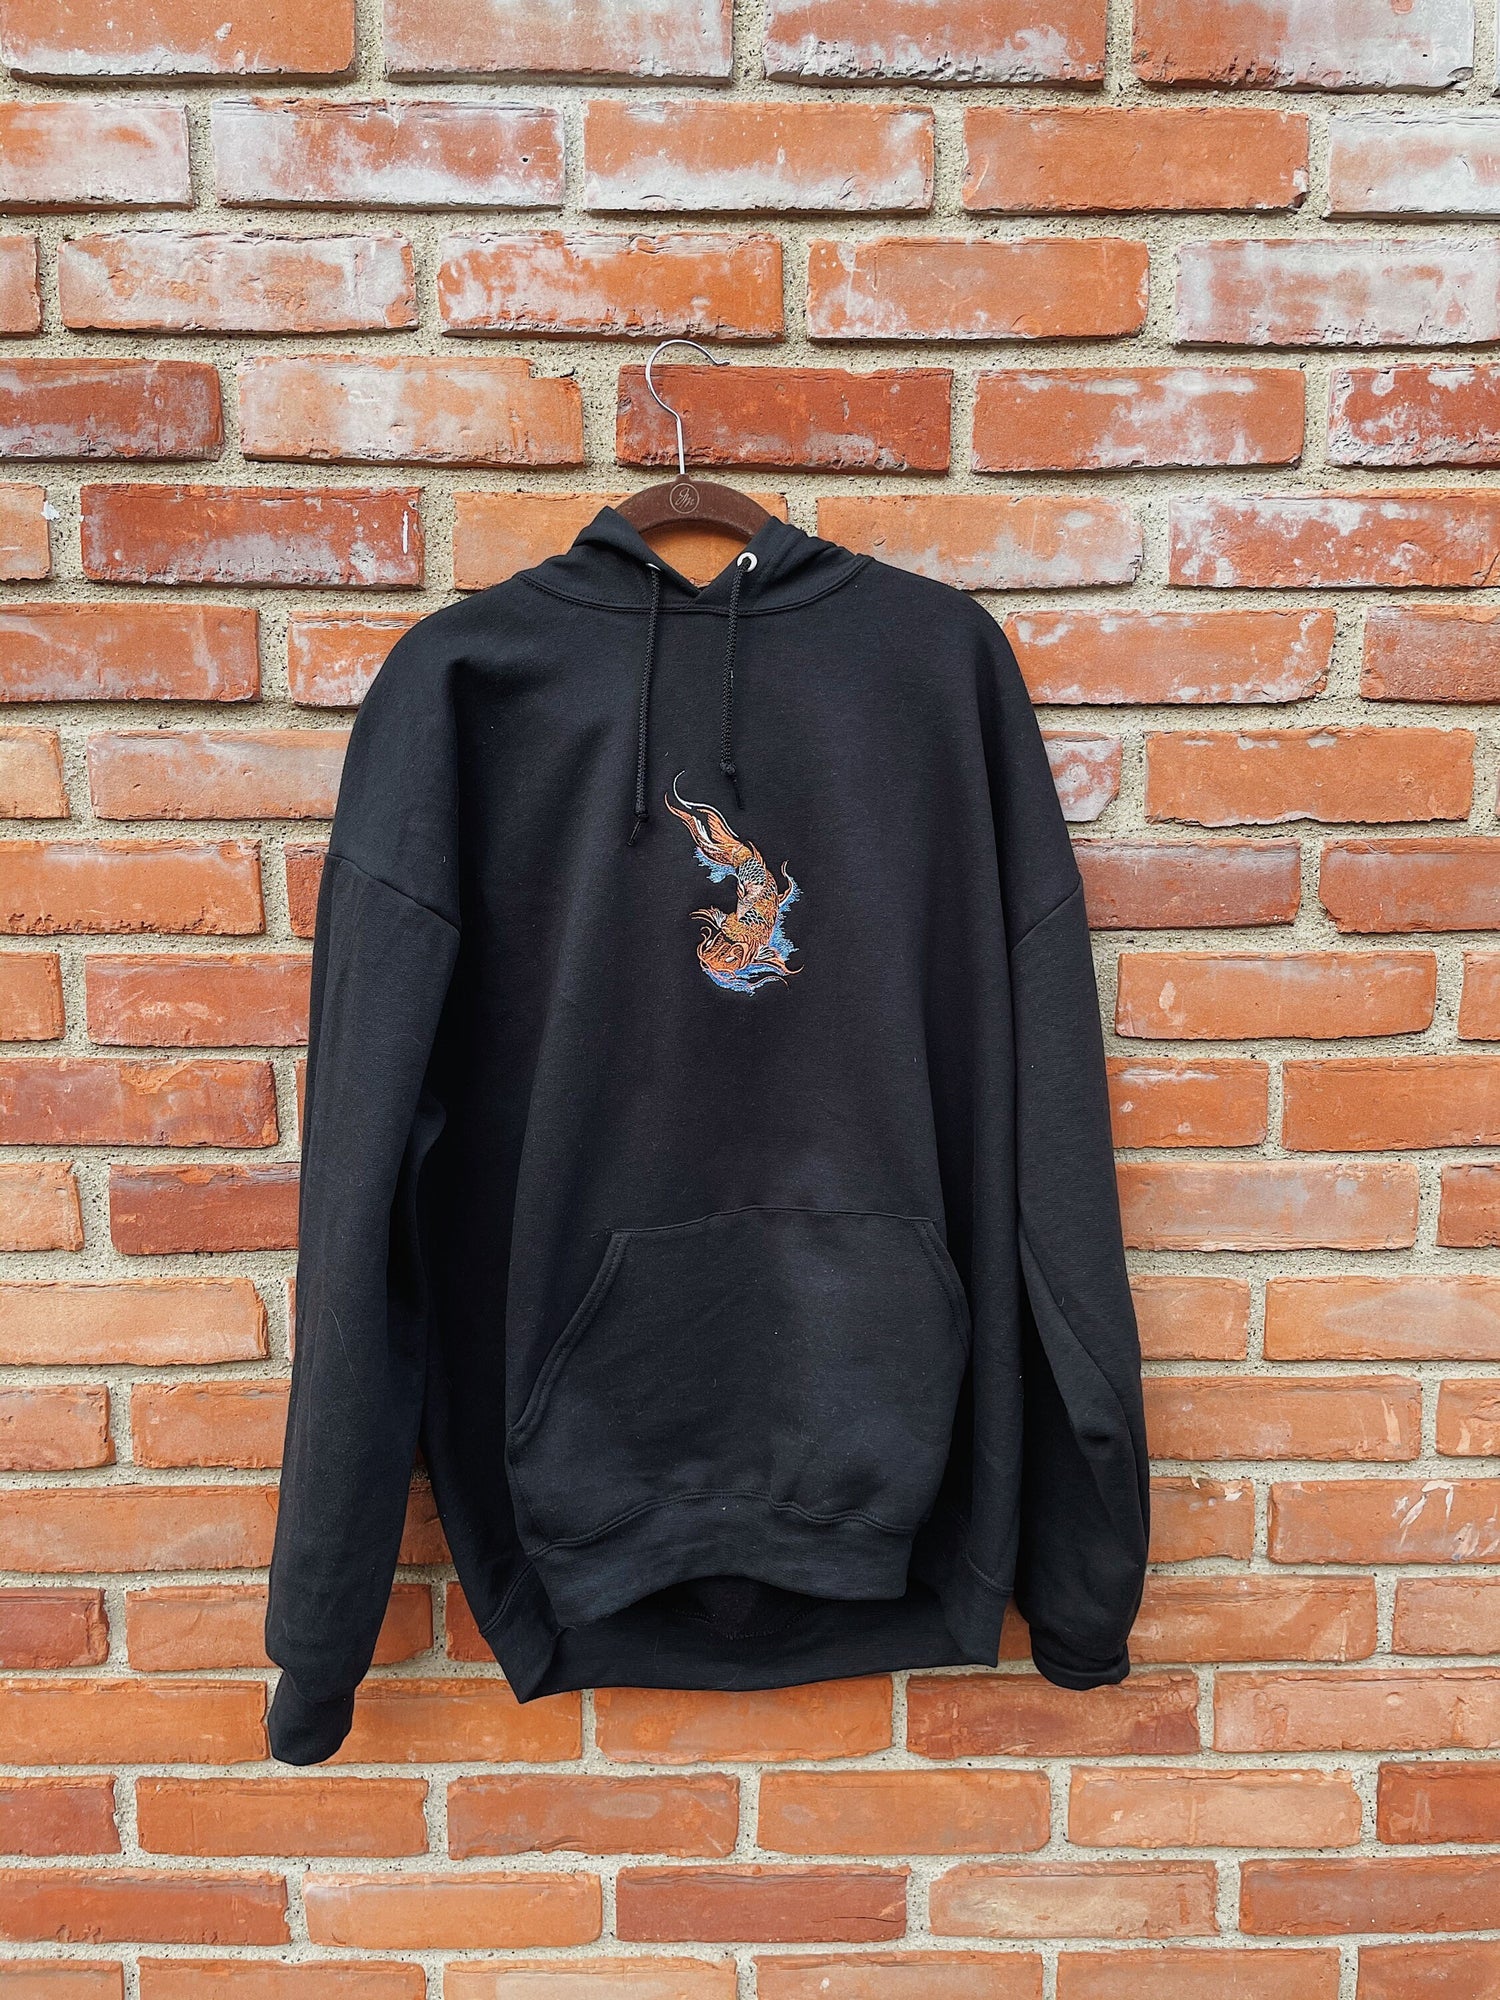 Embroidered Trout Fishing Hoodie Sweatshirt 